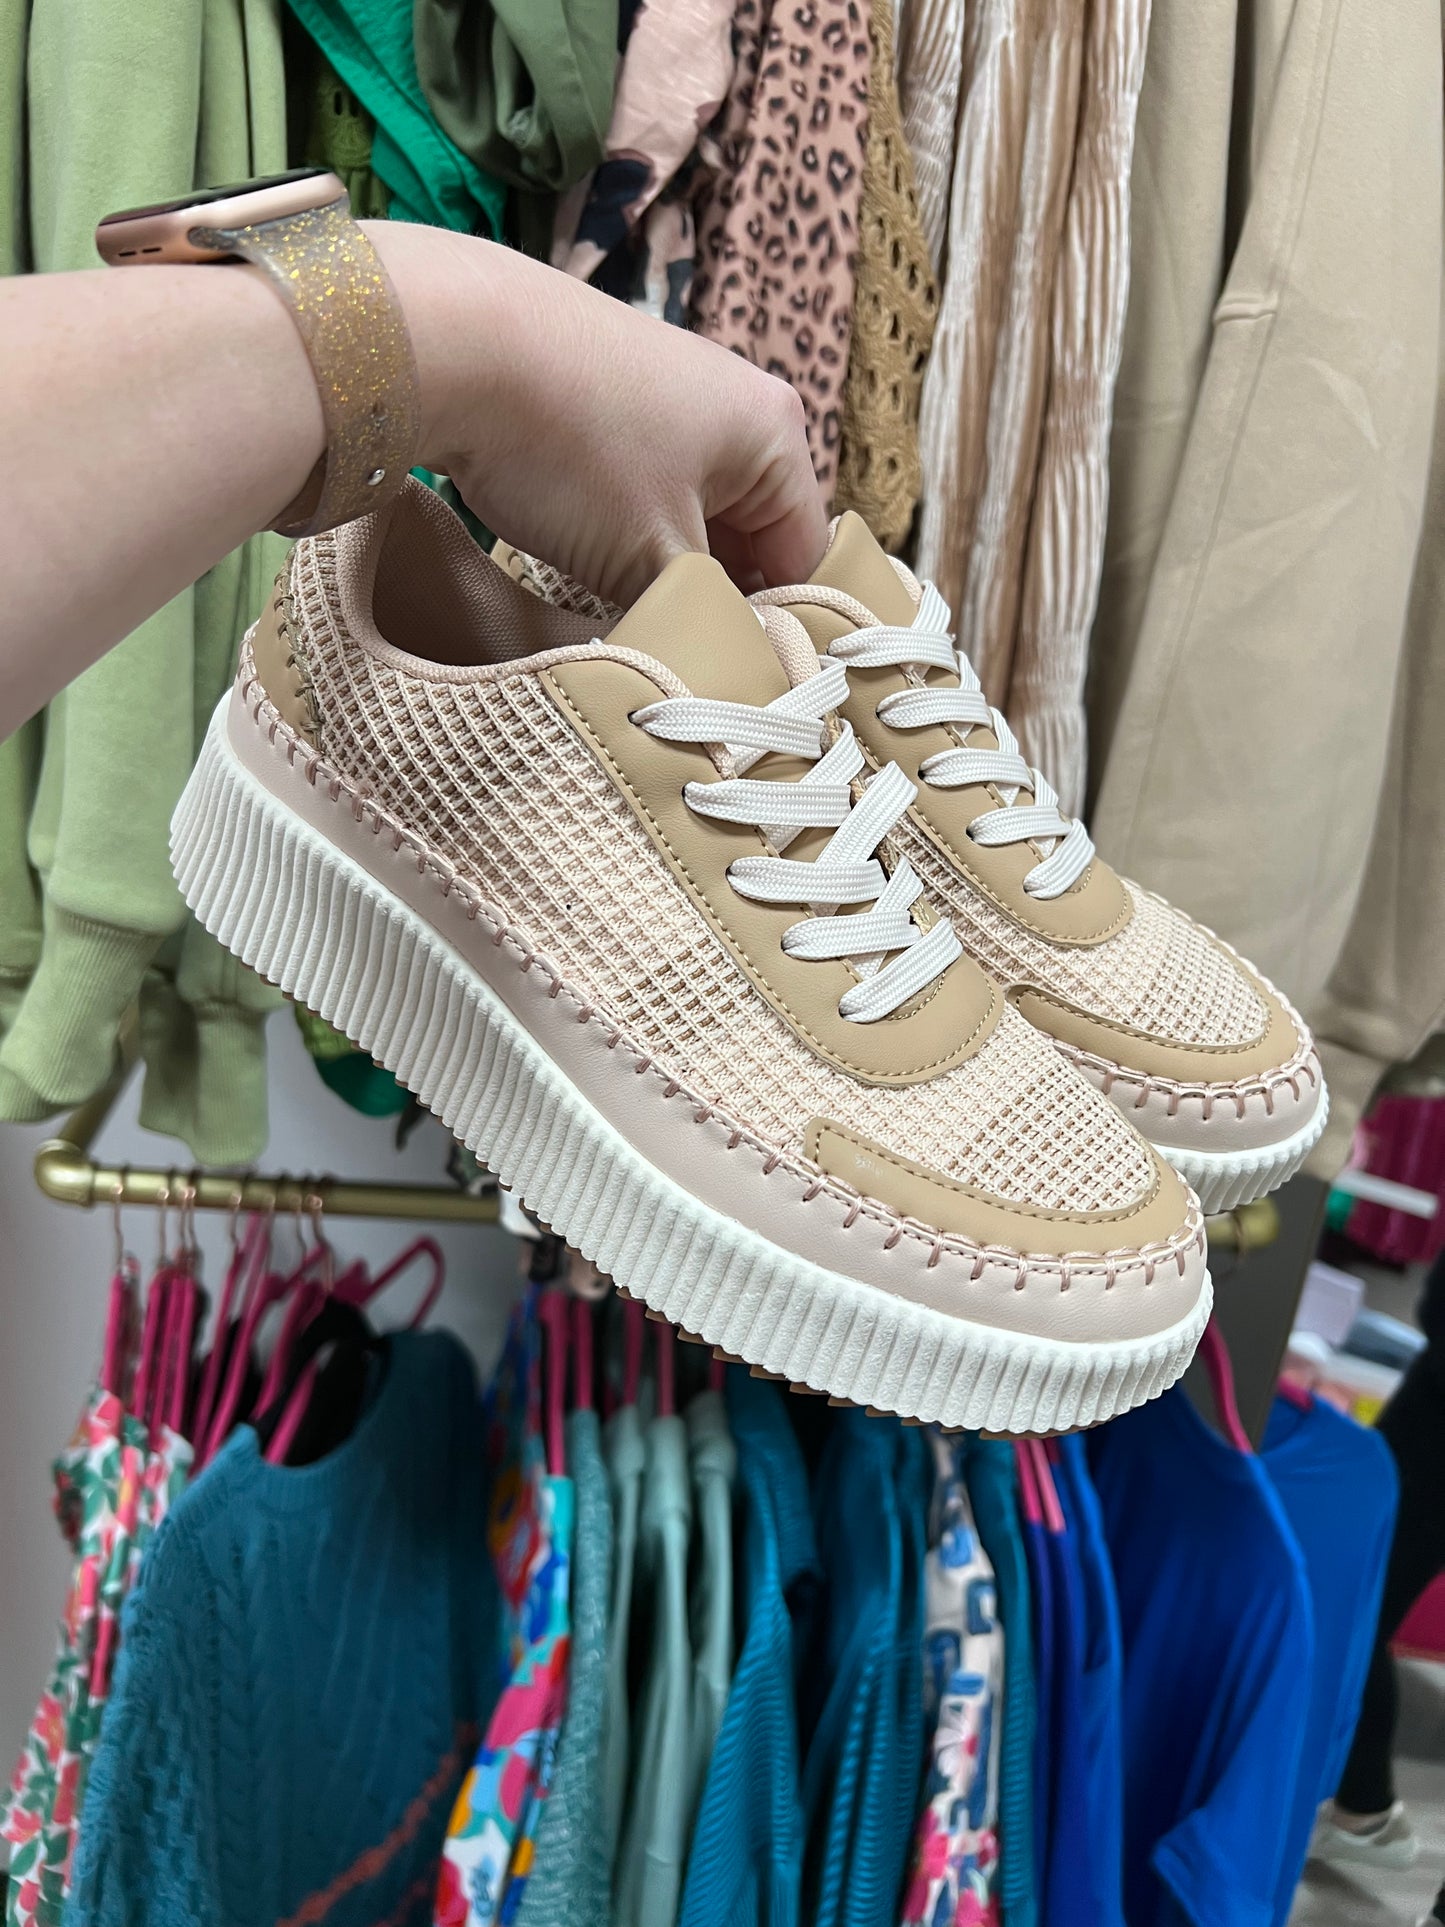 Nude Woven Sneakers